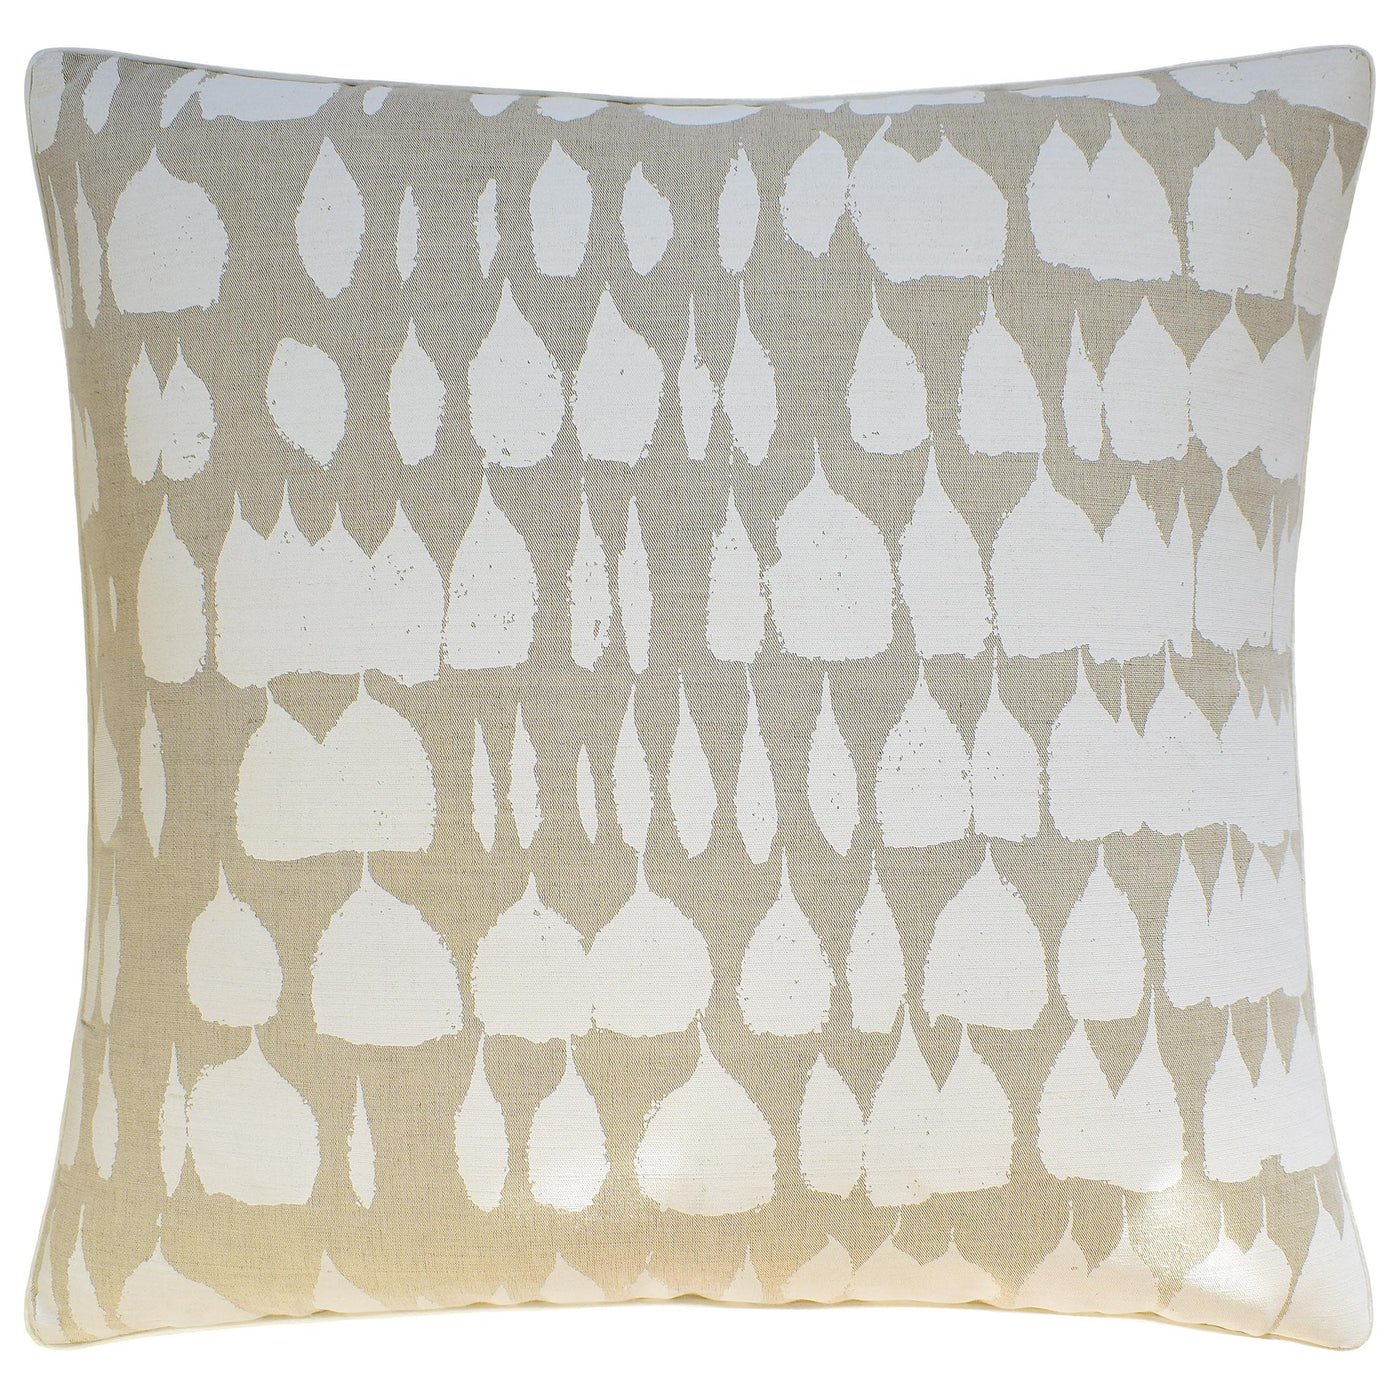 Queen of Spain Pillow in Natural